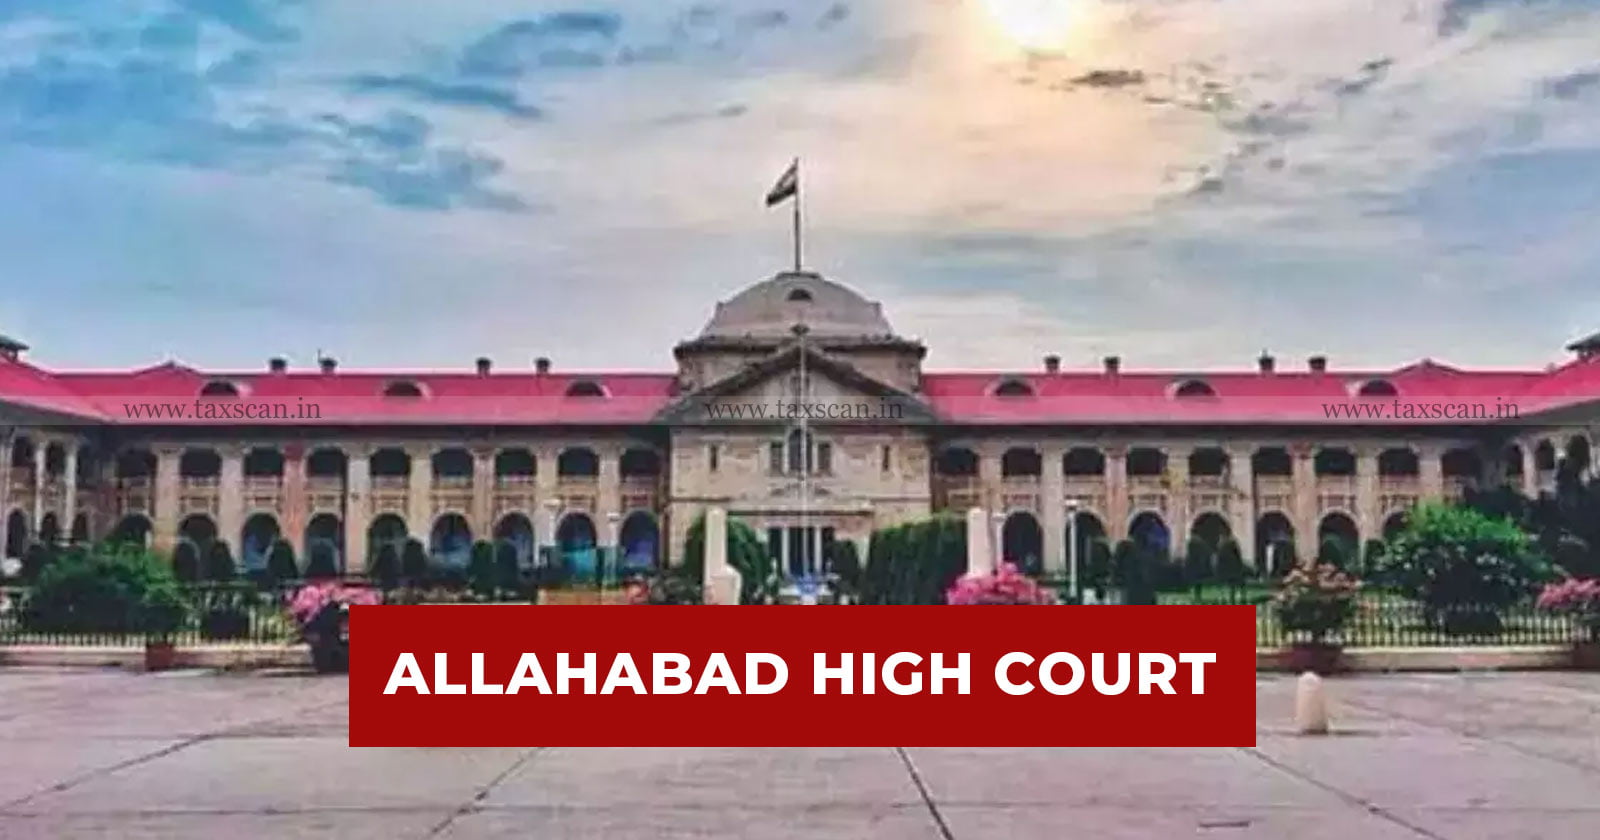 Allahabad High Court - GST - Central Excise Superintendent - Central Excise - taxscan